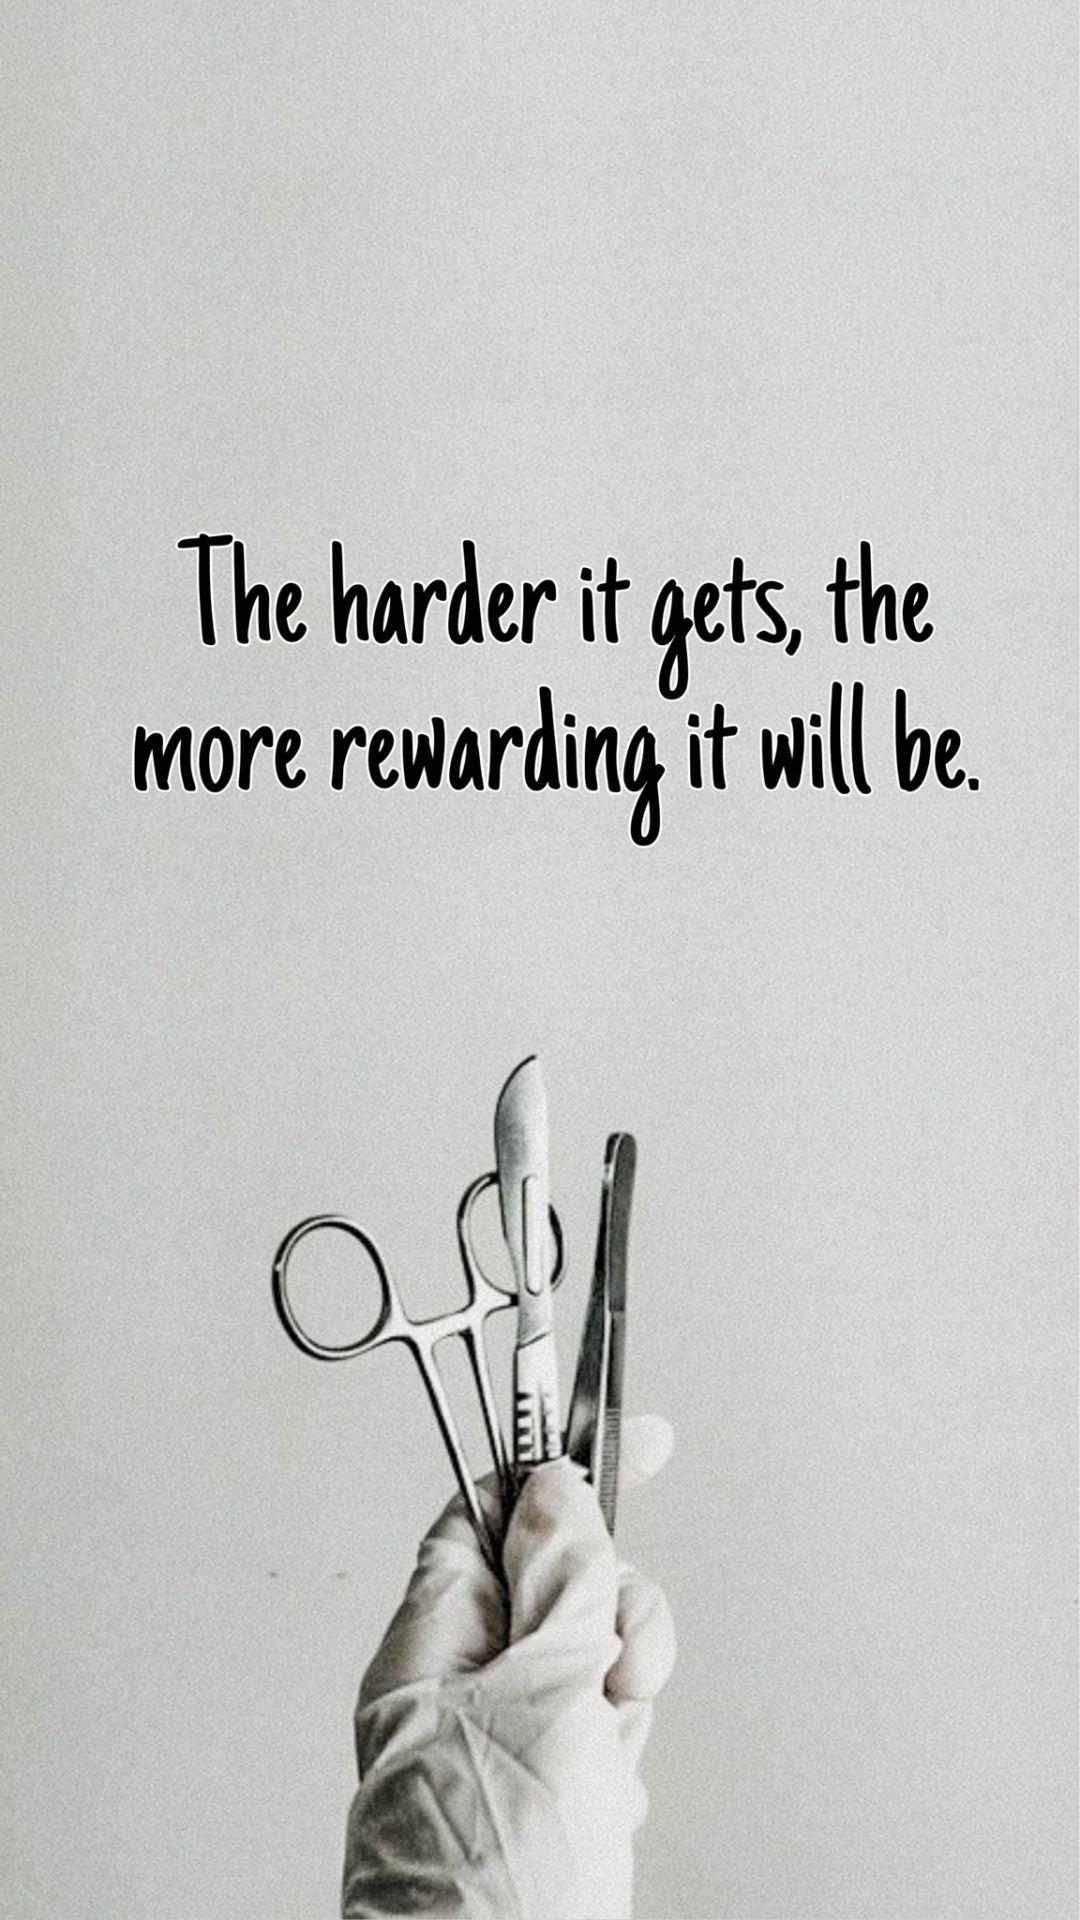 The harder it gets, the more rewarding it will be. - Medical